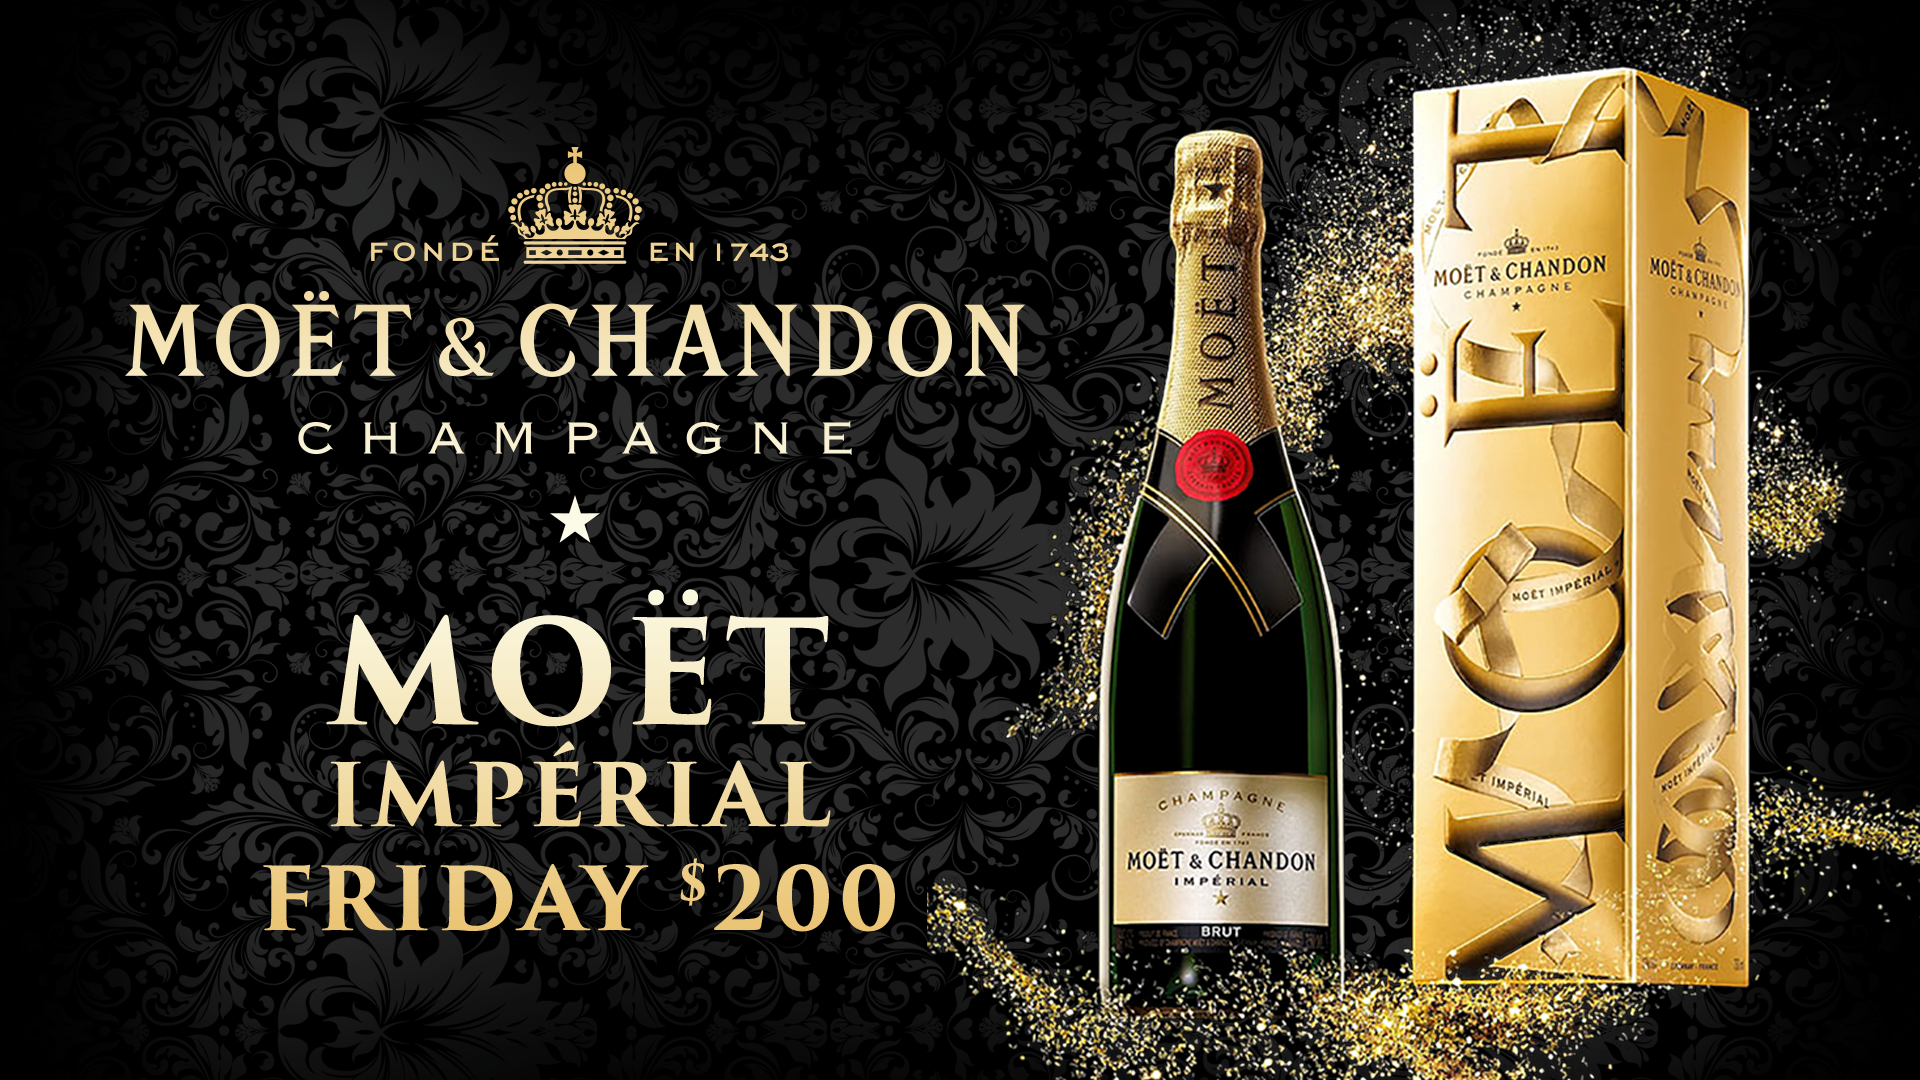 Friday Moet Imperial drink special